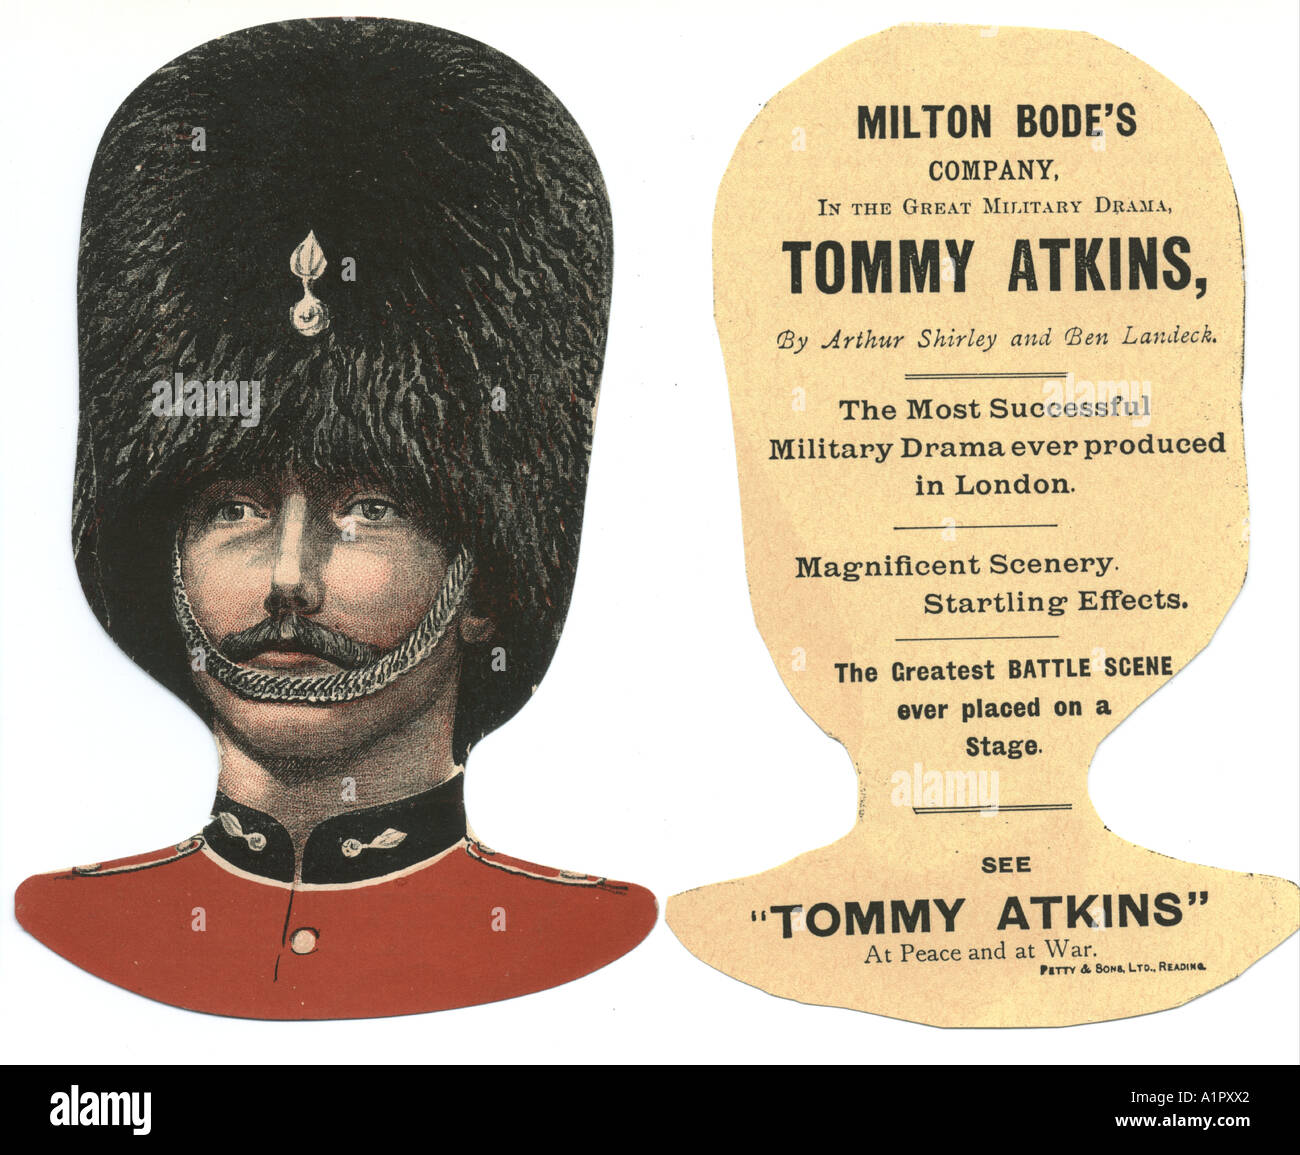 Theatre advertisement for Tommy Atkins, Military Drama, circa 1916. Stock Photo